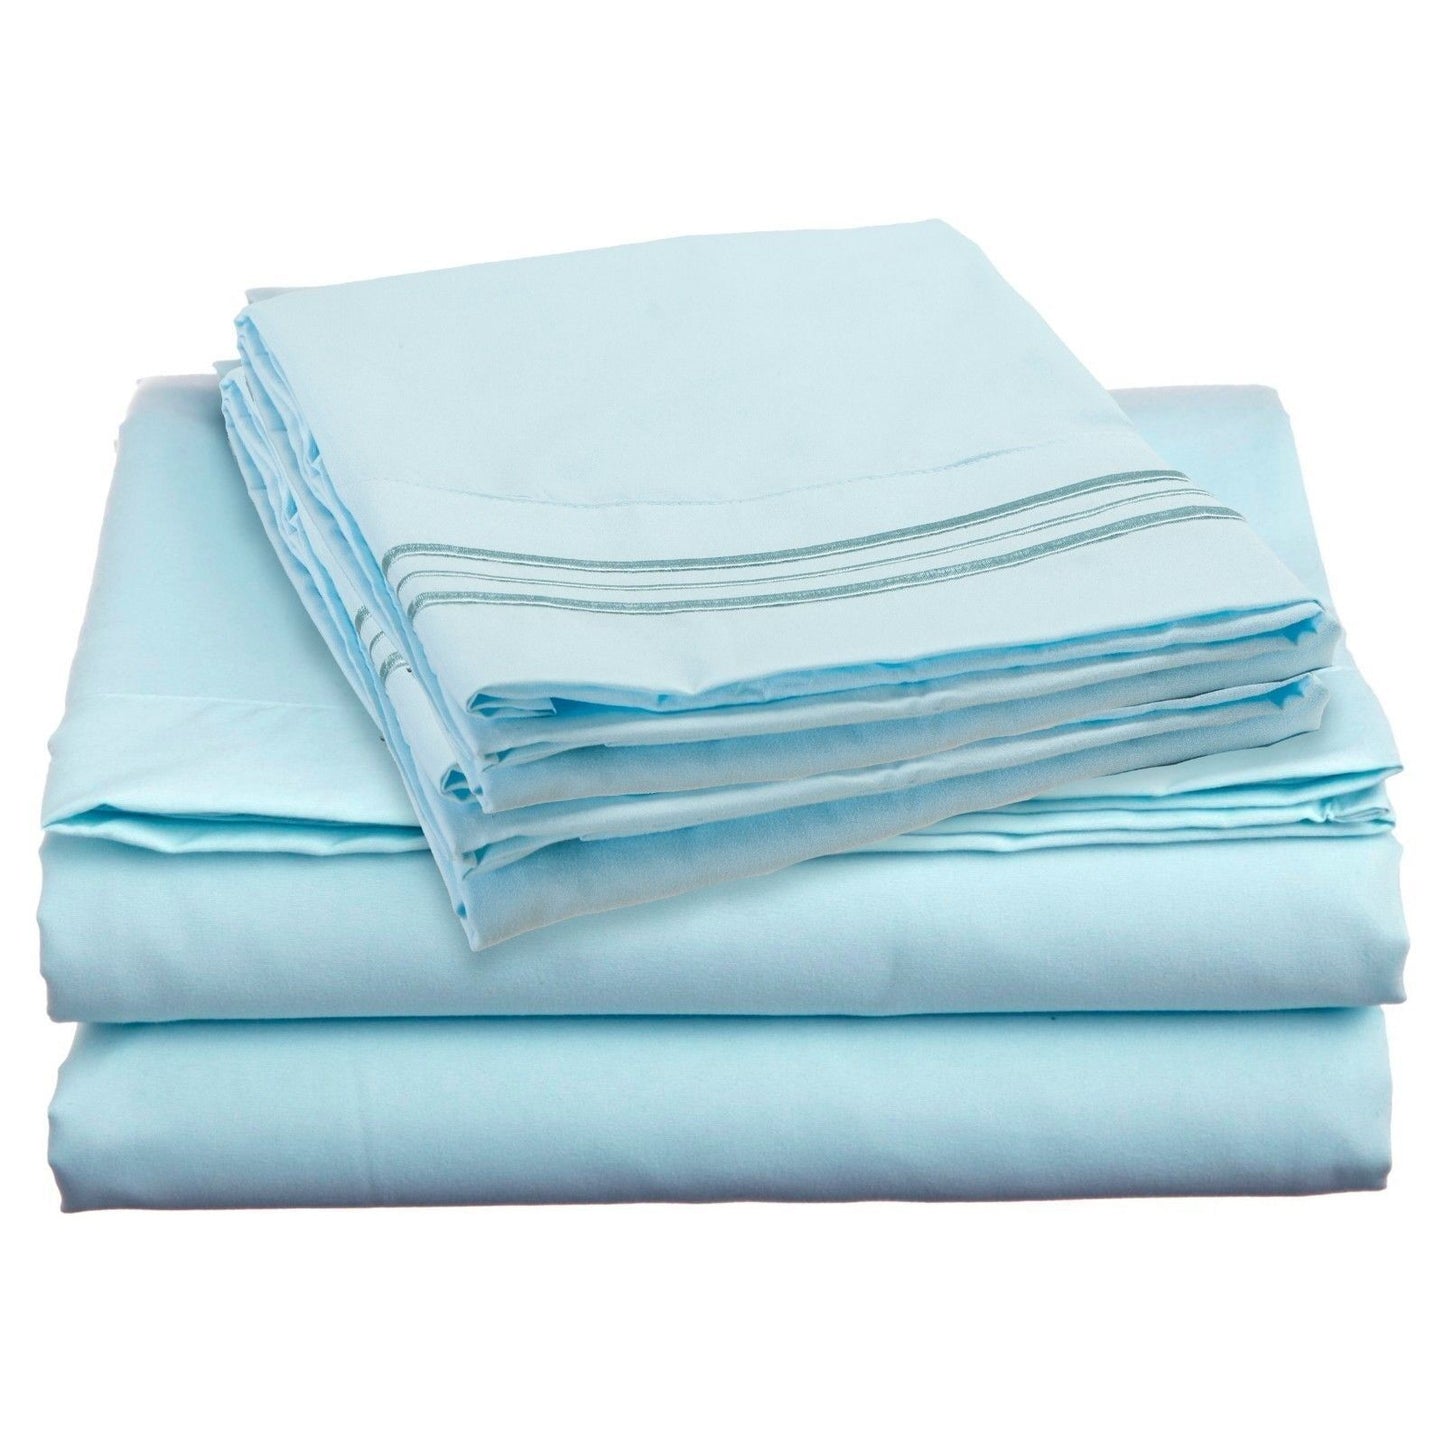 Bed Sheets - Deep Pocket Bed Sheets- 4 Piece Set, Queen, King, Twin, or Full Size - King / Light Blue